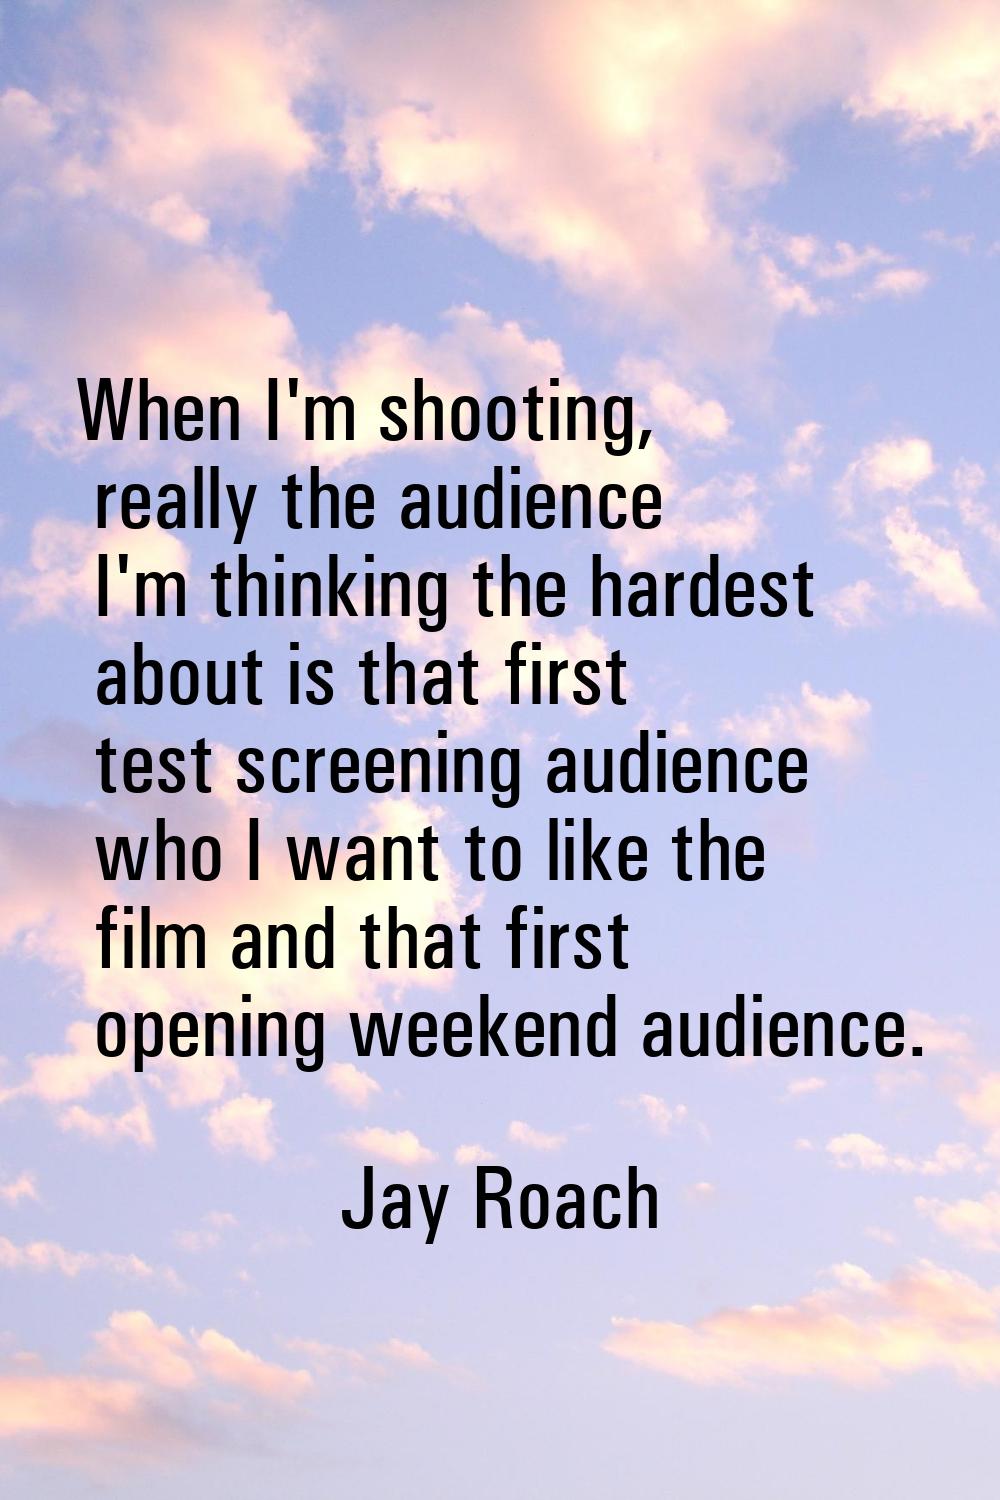 When I'm shooting, really the audience I'm thinking the hardest about is that first test screening 